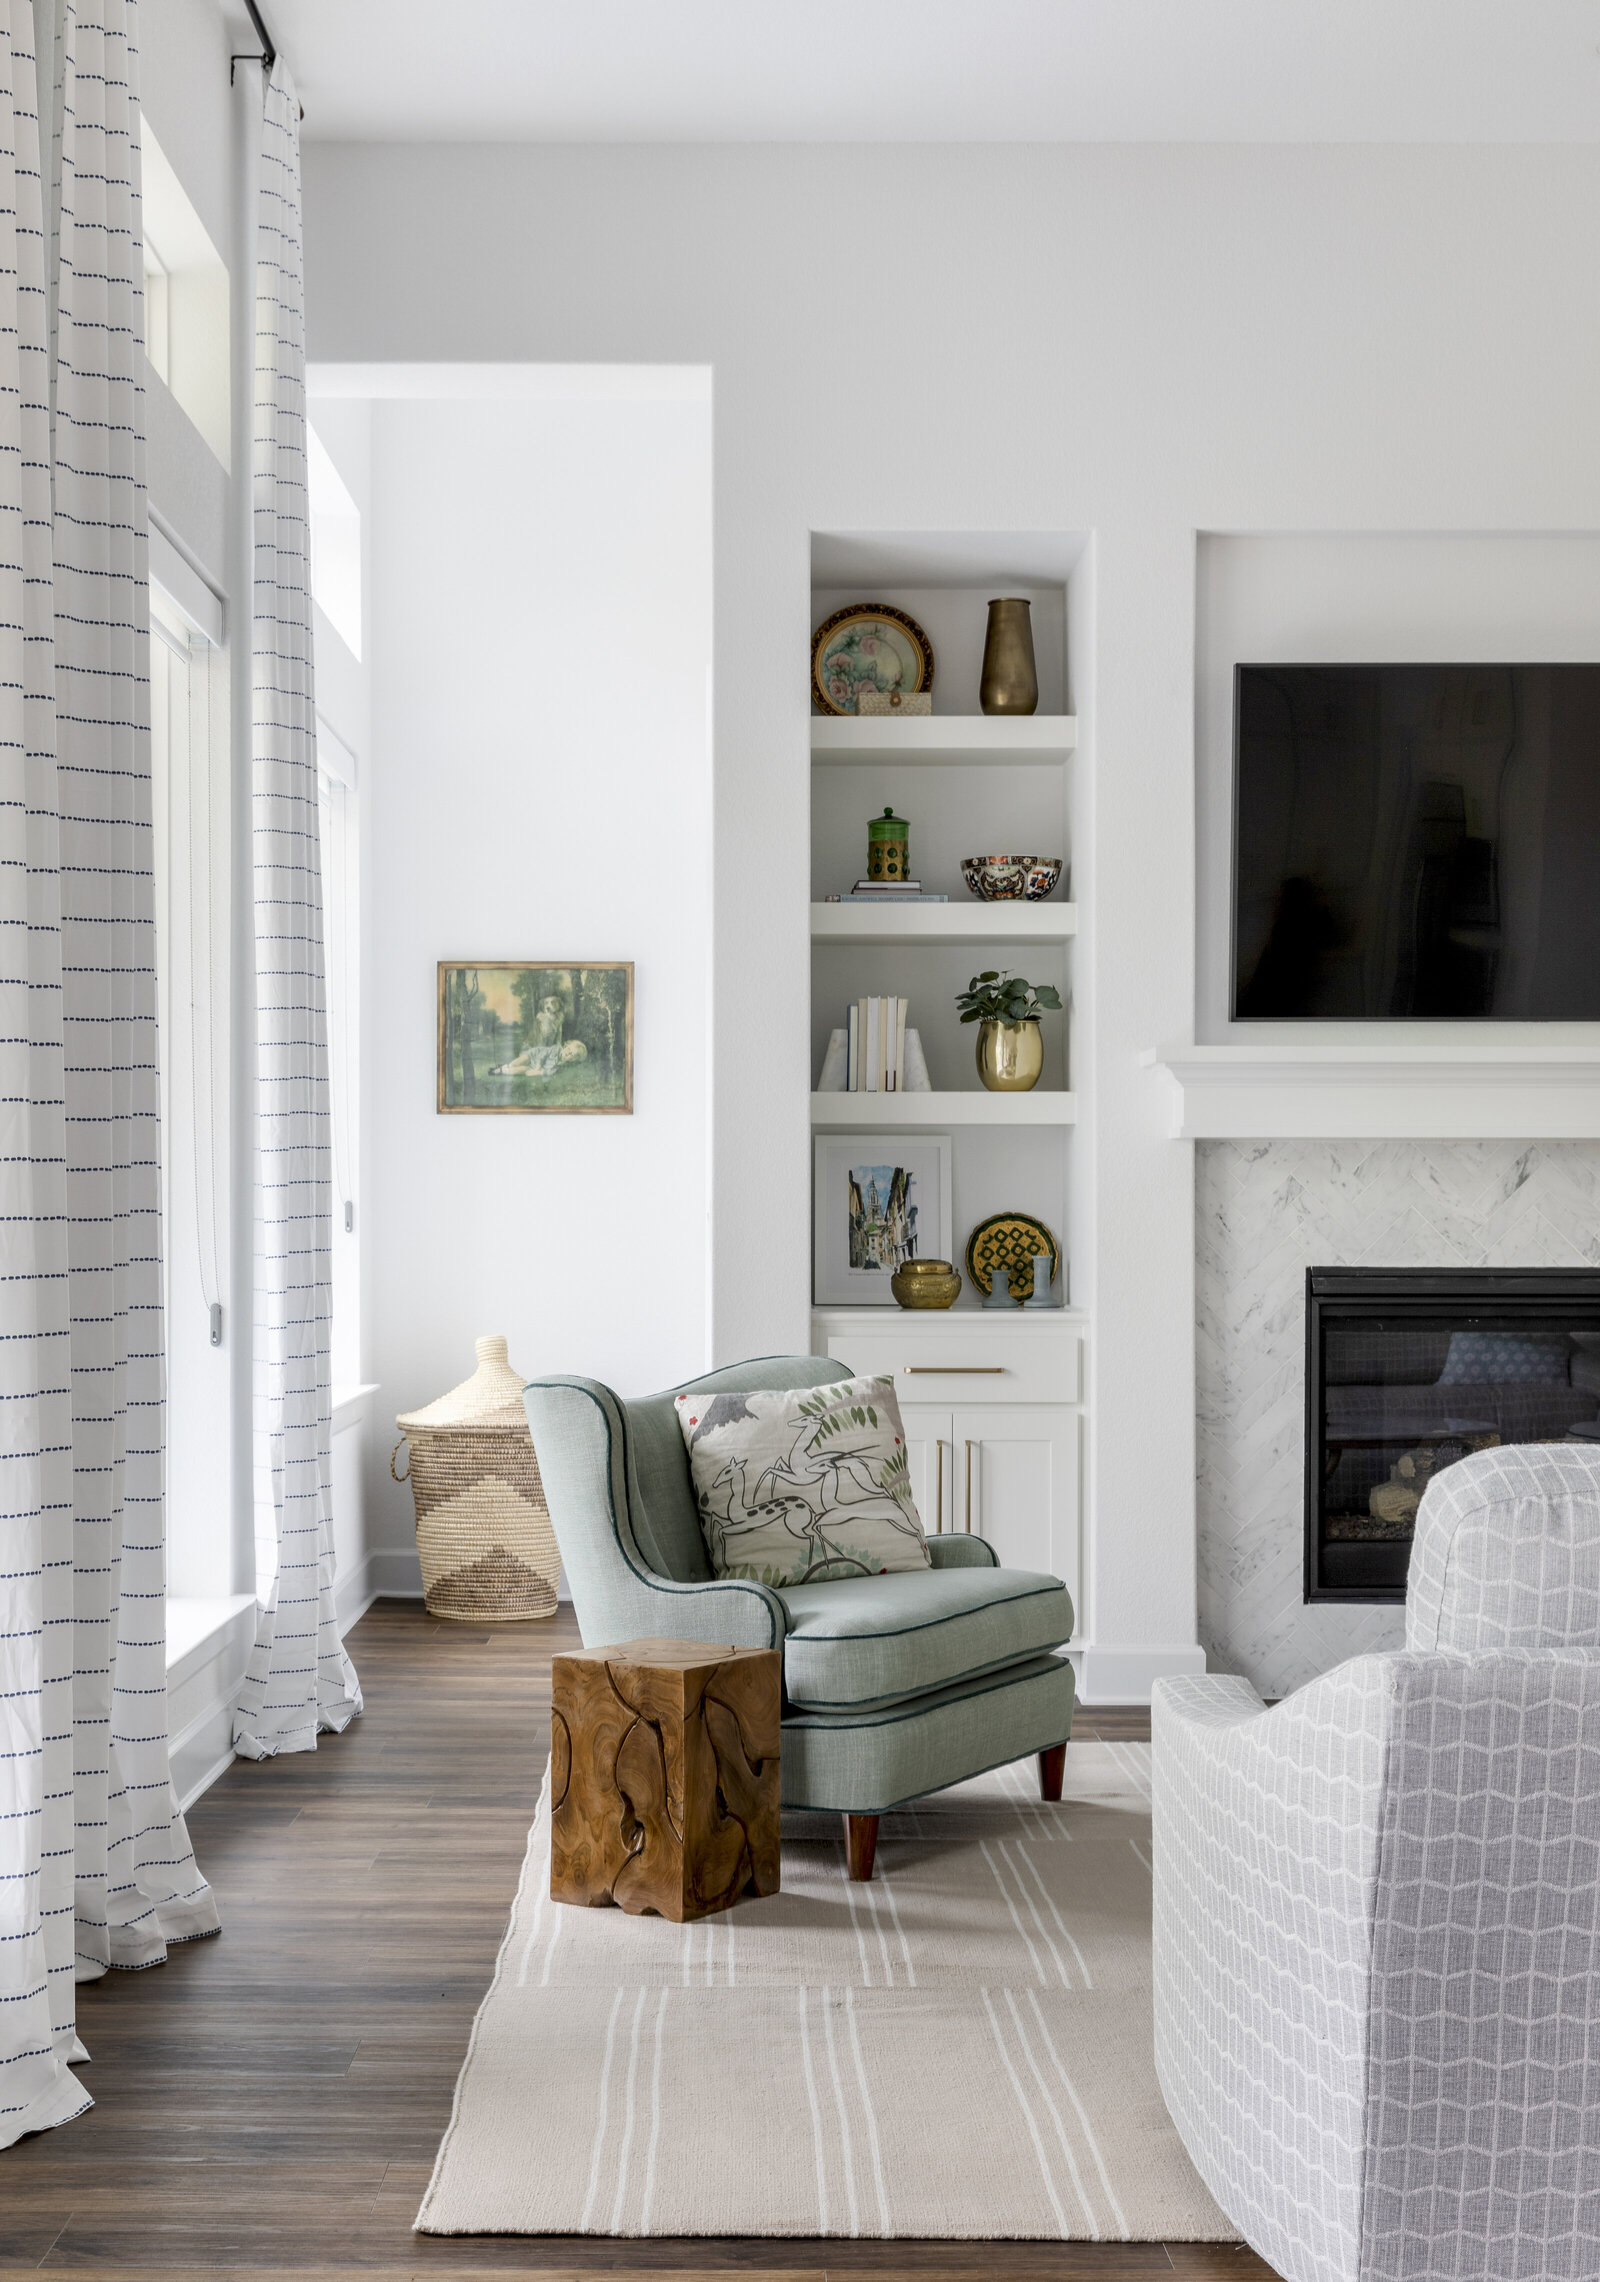 white livingroom with fireplace and shelves and a tv above the fire place. antique green chair with a wood side table. tall windows with plaid curtains